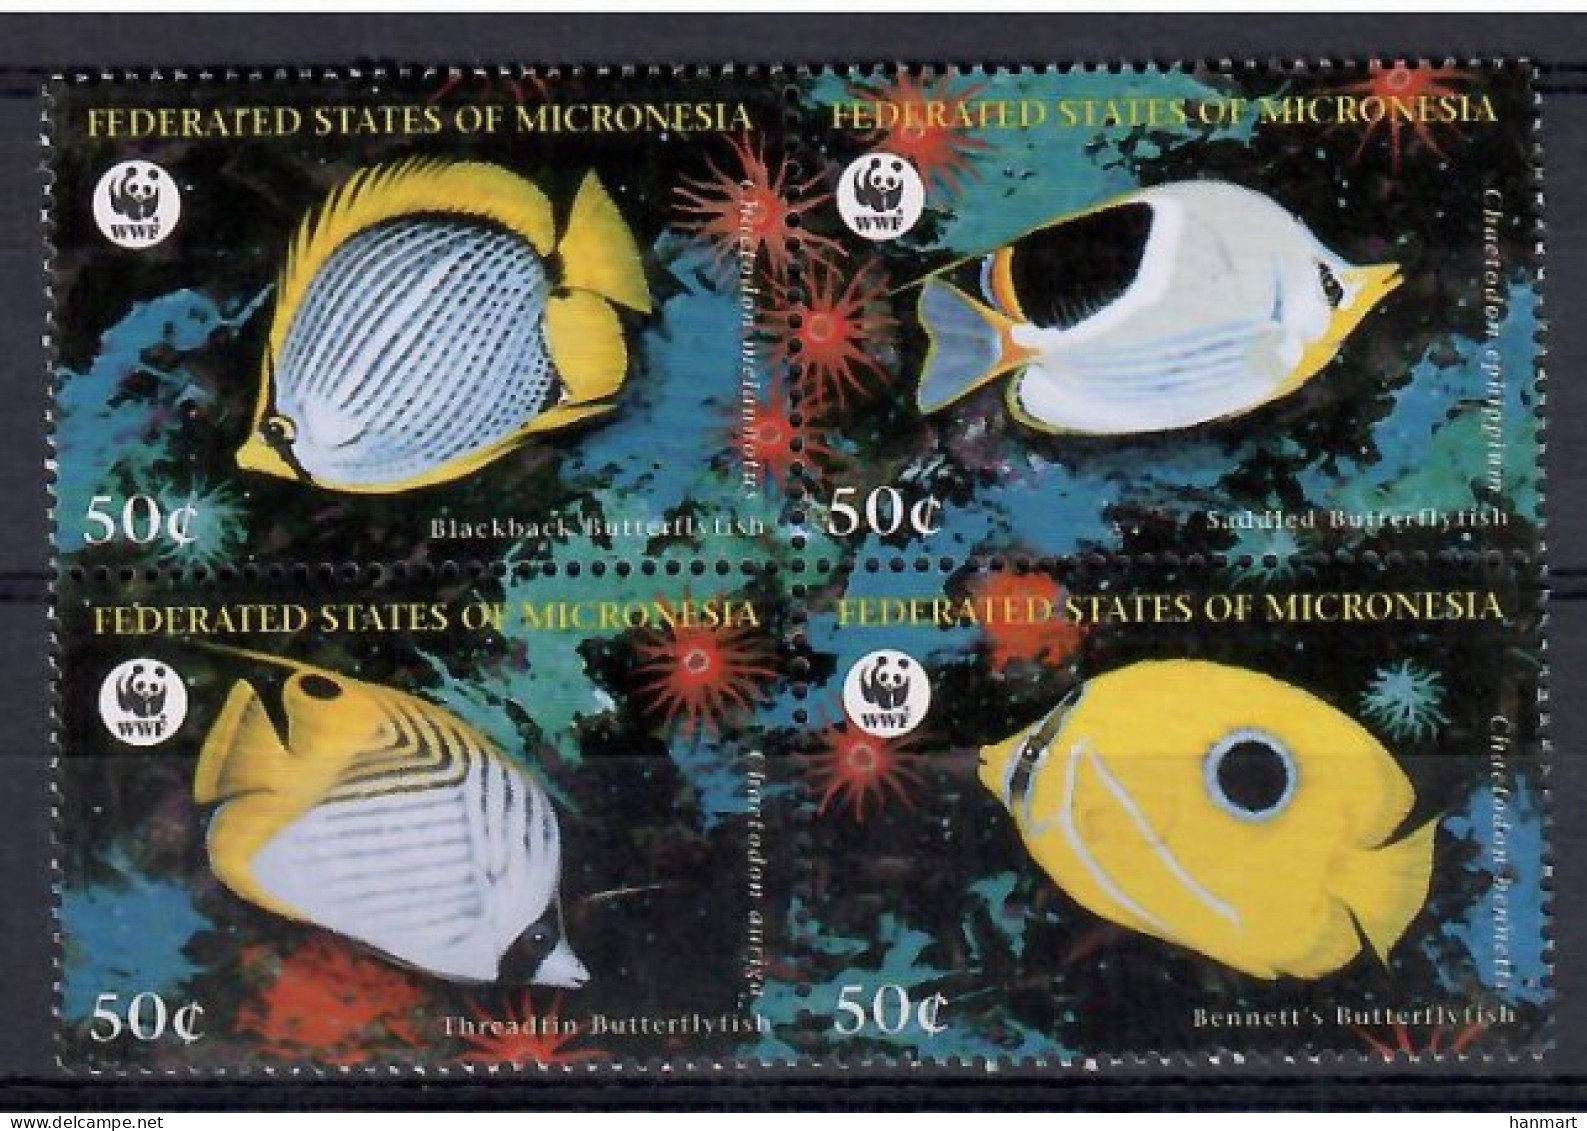 Micronesia, Federated States Of  1997 Mi 583-586 MNH  (ZS7 MCRvie583-586) - Coquillages